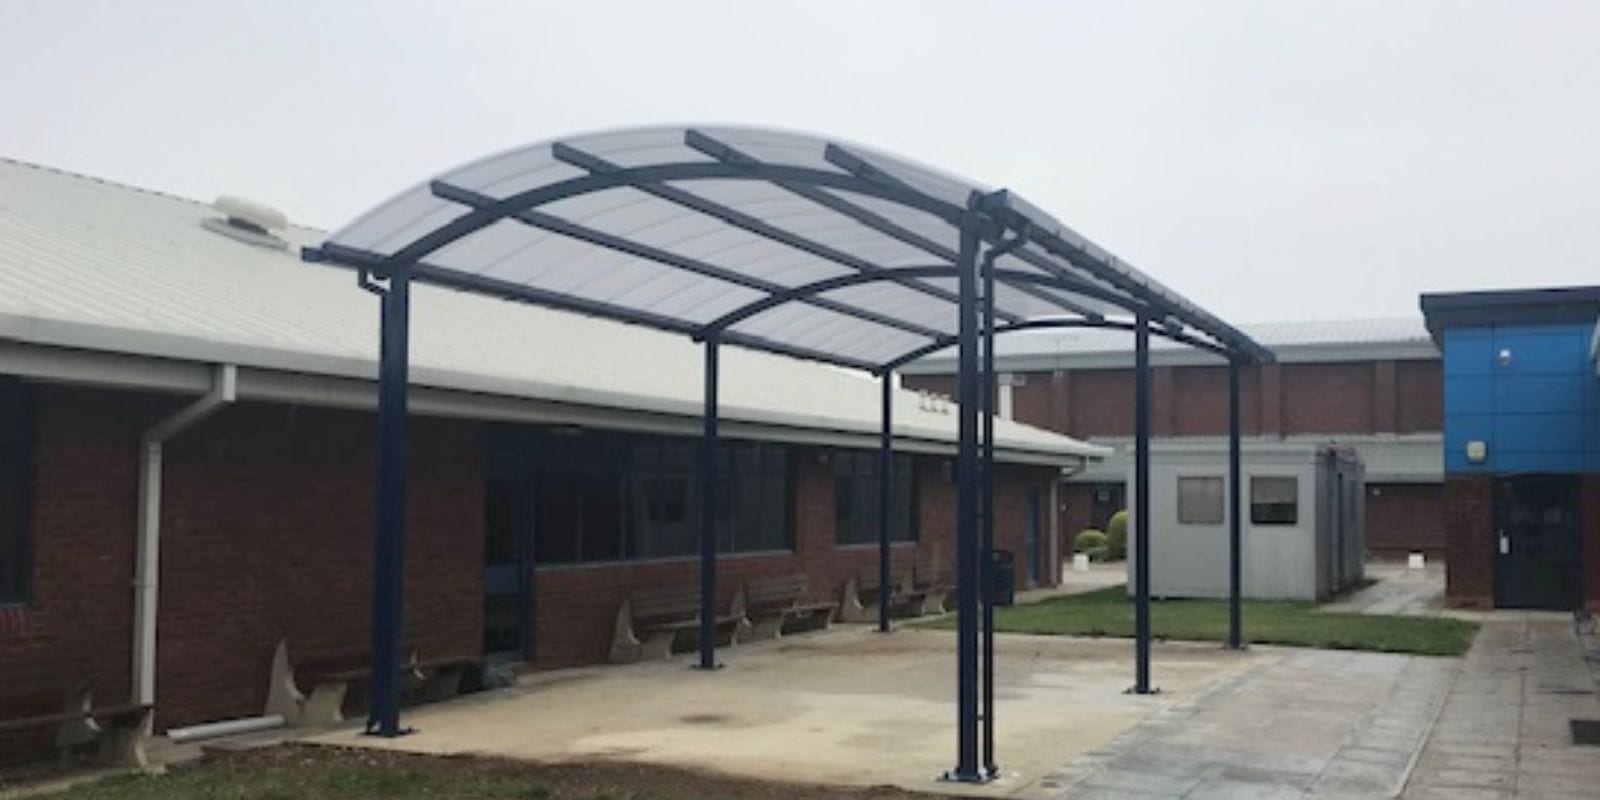 Curved roof shelter we designed for Sir Thomas Rich's School